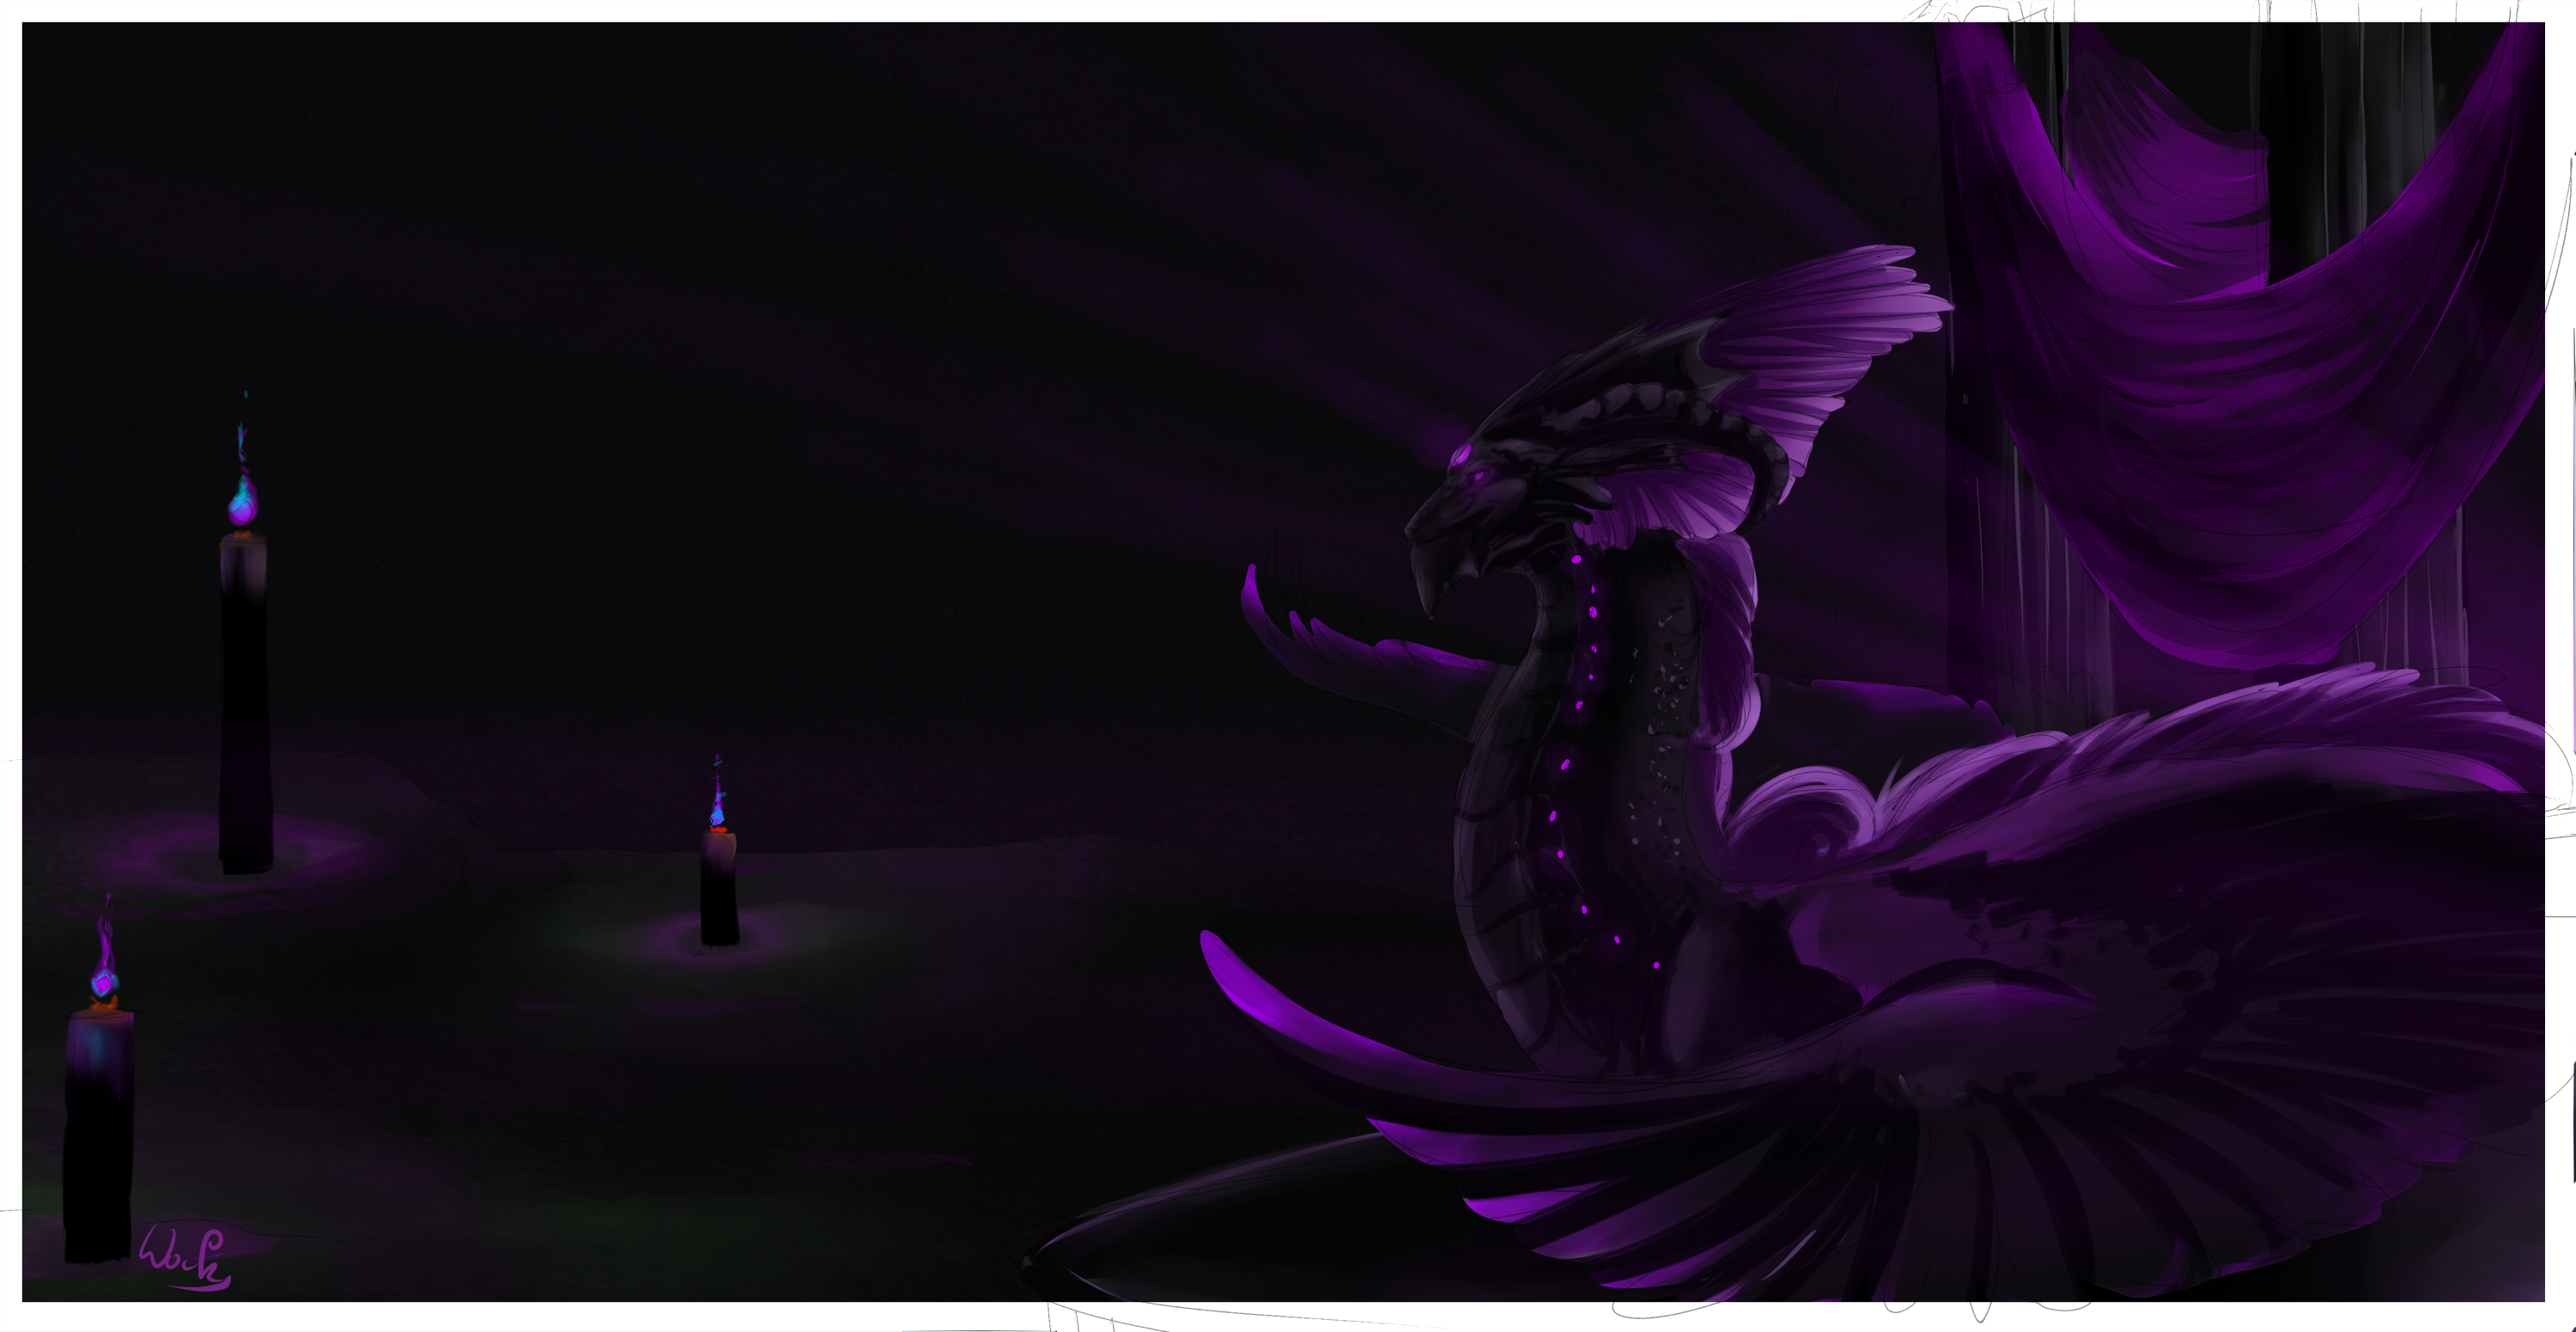 minecraft ender dragon wallpapers Wallpapers